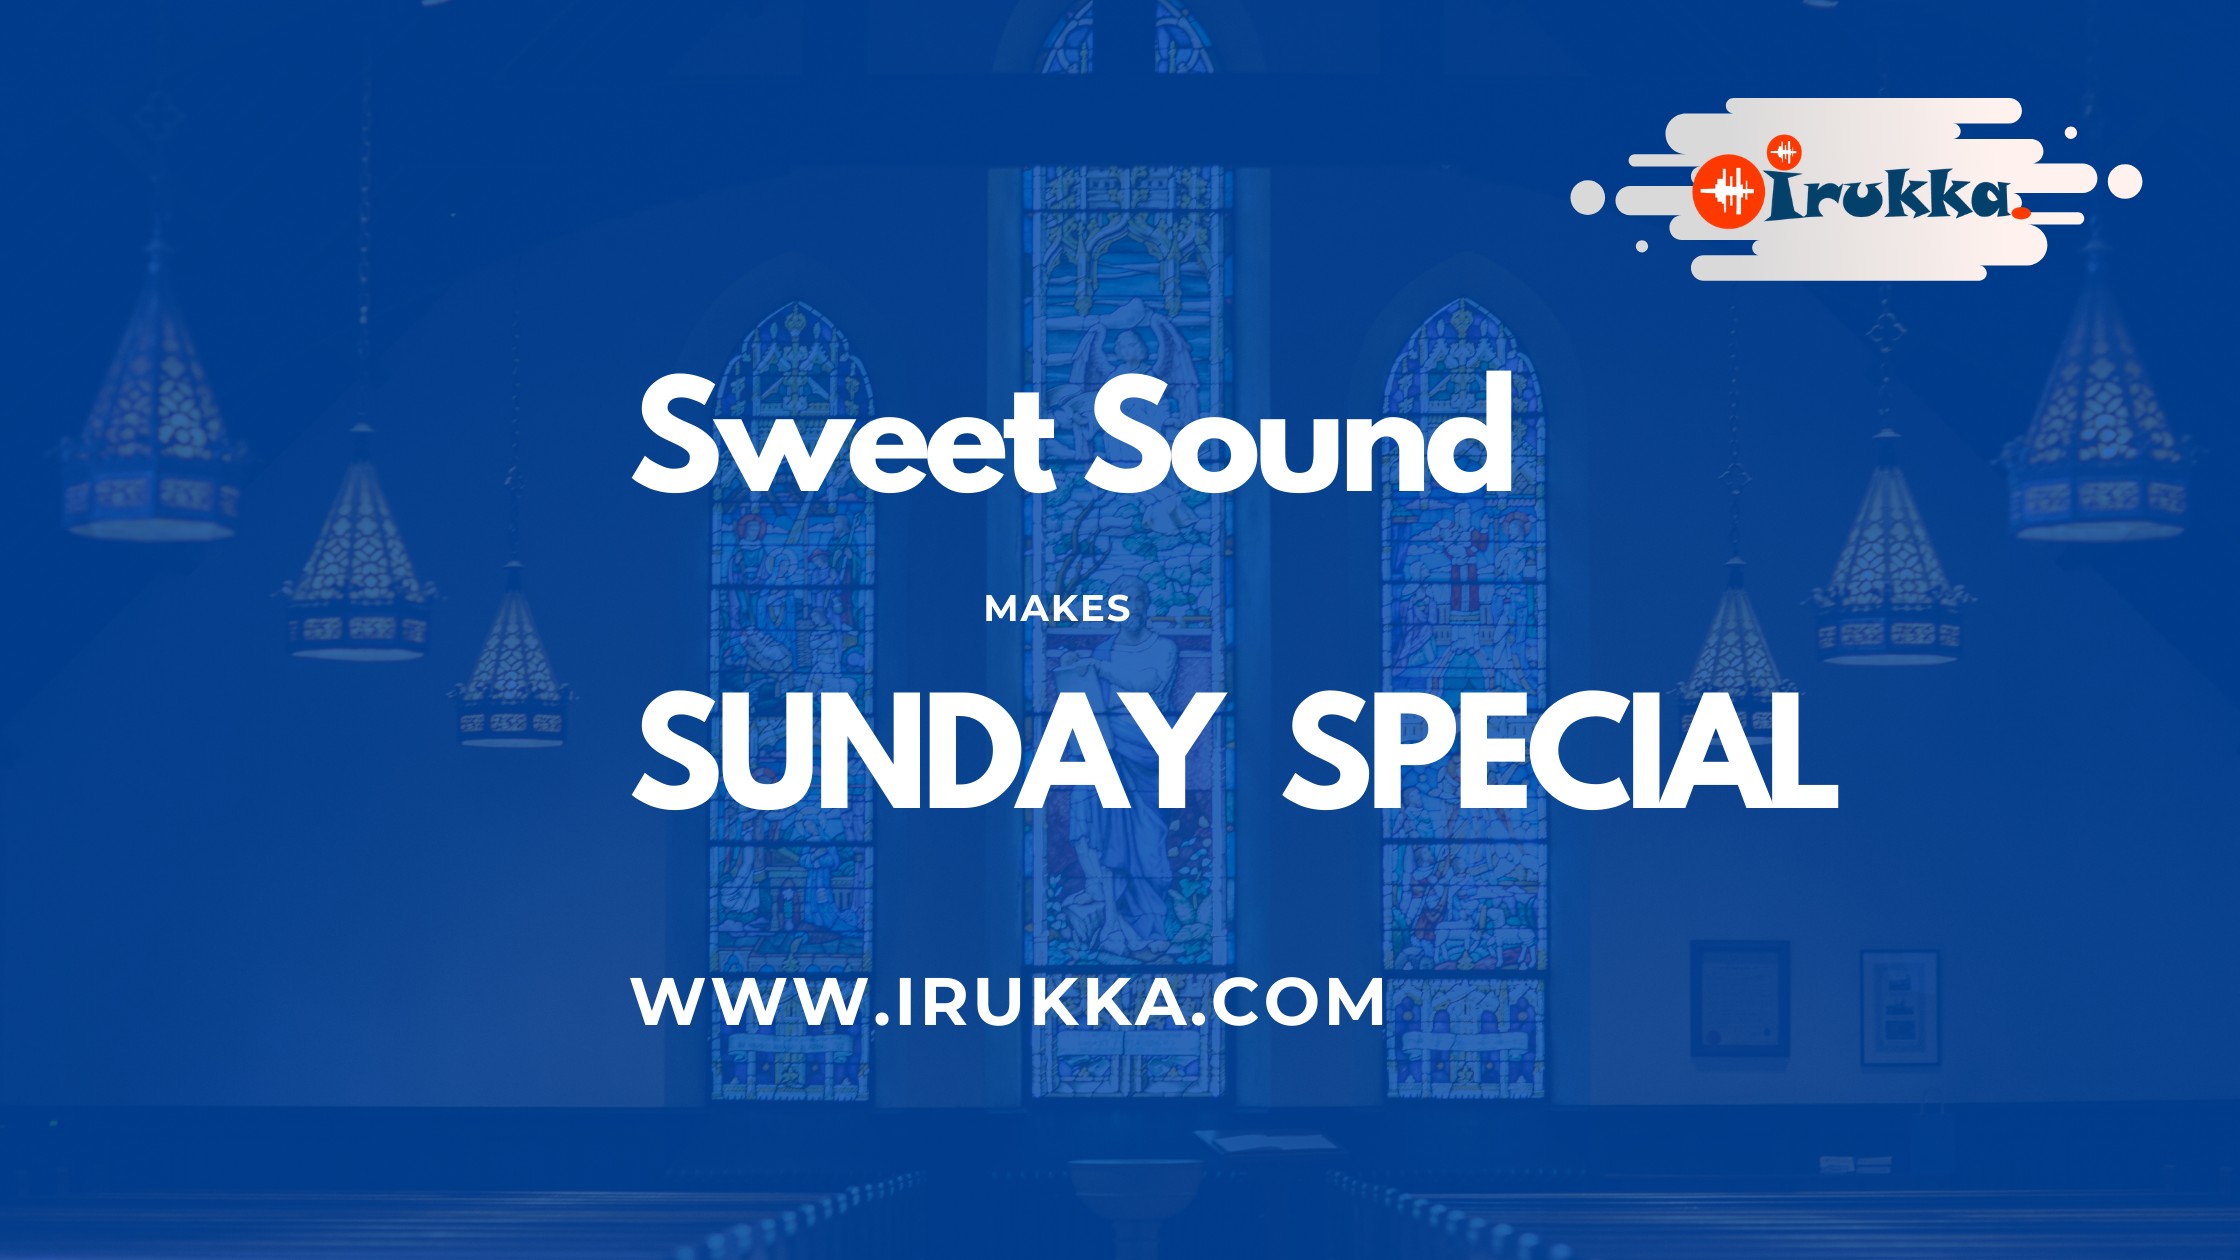 Sweet Sound MAKES SUNDAY SPECIAL- IRUKKA SOUND EQUIPMENT ONLINE STORE- SUNDAY SPECIAL CHURCH MUSICAL INSTRUMENTS